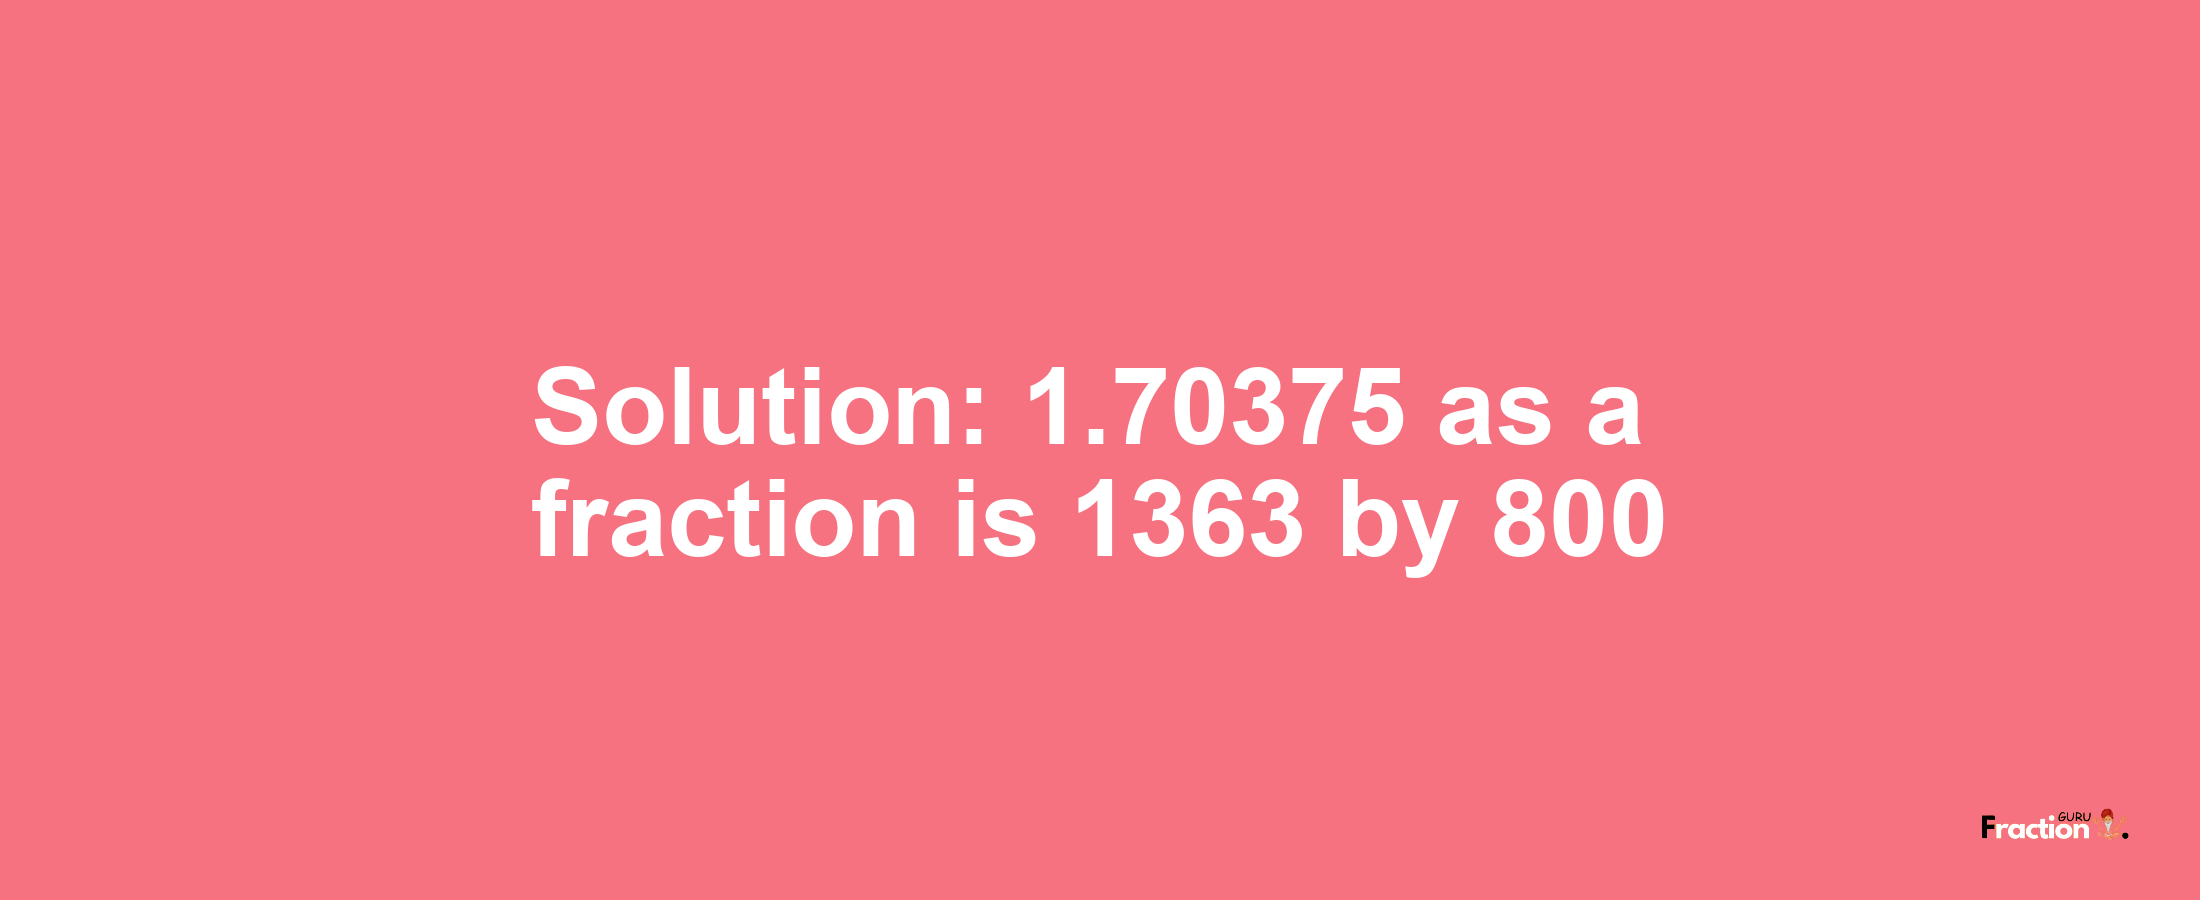 Solution:1.70375 as a fraction is 1363/800